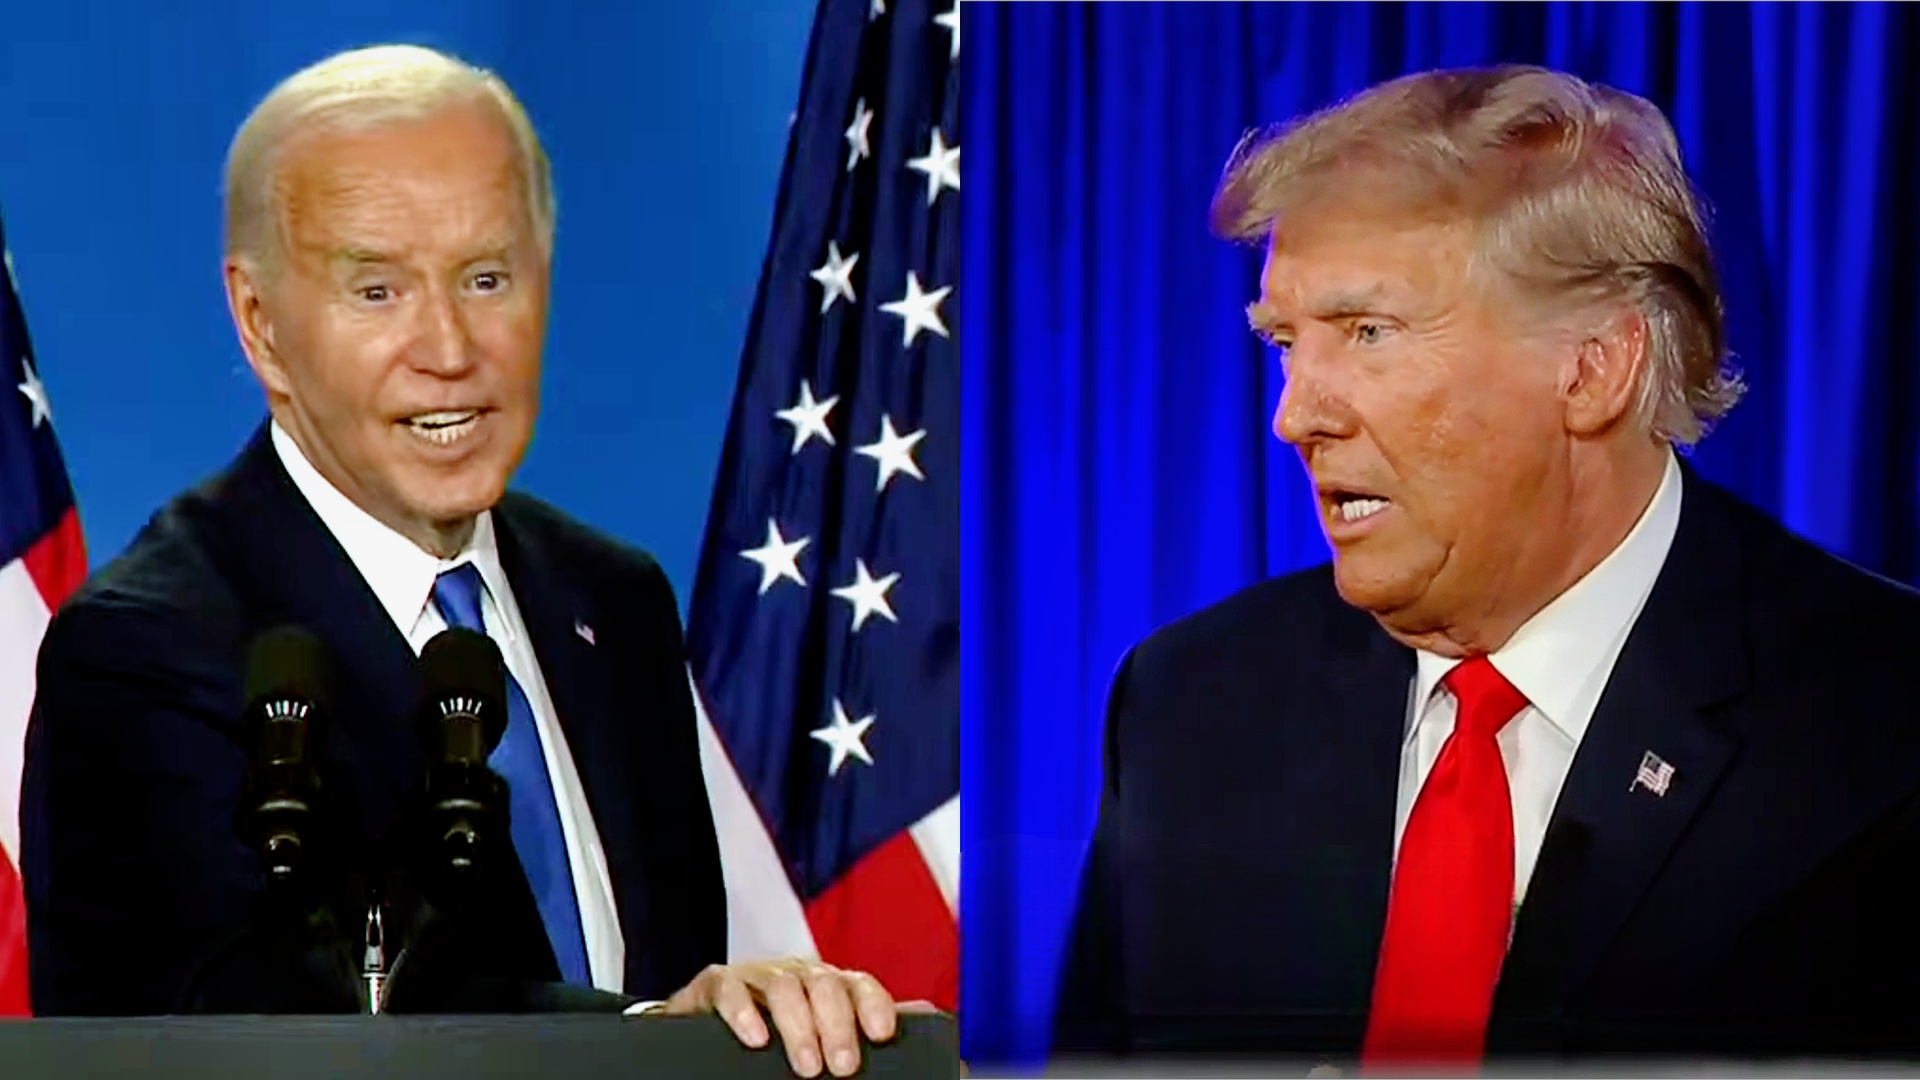 Trump Wants the Republican Party to Be ‘Reimbursed For Fraud’ Because Biden Dropped Out